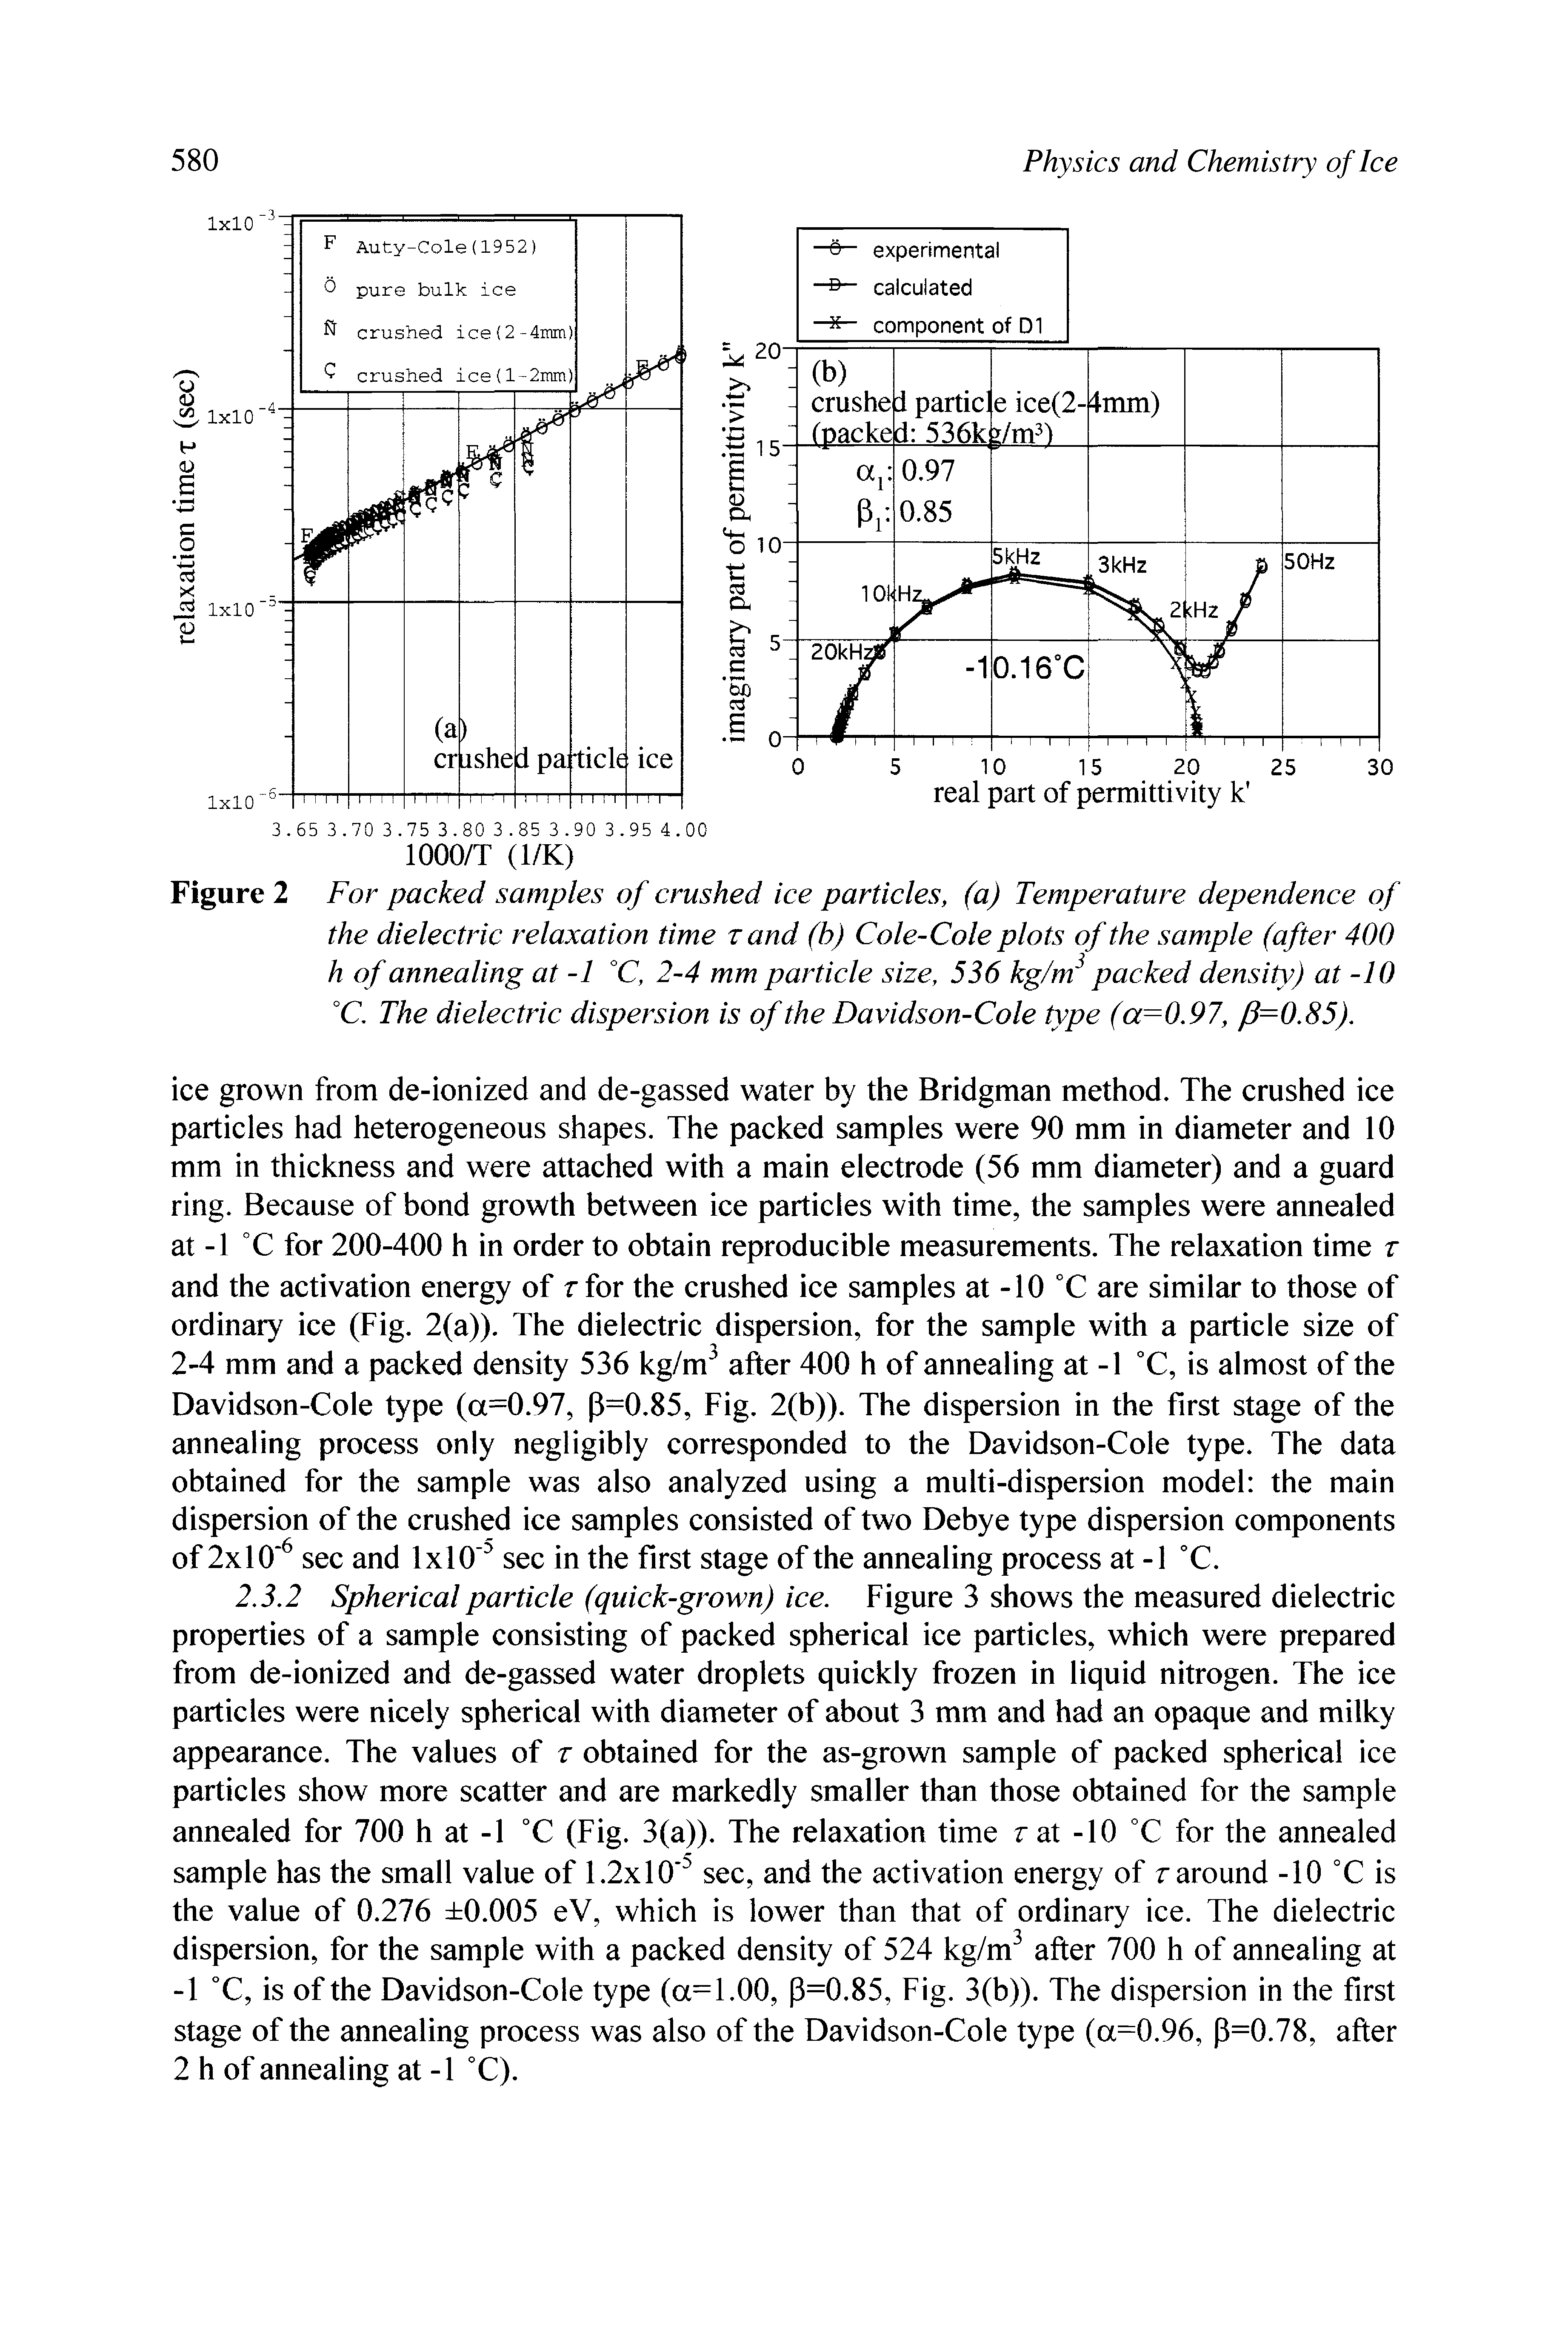 Figure 2 For packed samples of crushed ice particles, (a) Temperature dependence of the dielectric relaxation time rand (h) Cole-Cole plots of the sample (after 400 h of annealing at -1 °C, 2-4 mm particle size, 536 kg/m packed density) at -10 °C. The dielectric dispersion is of the Davidson-Cole type (a=0.97, f=0.85).